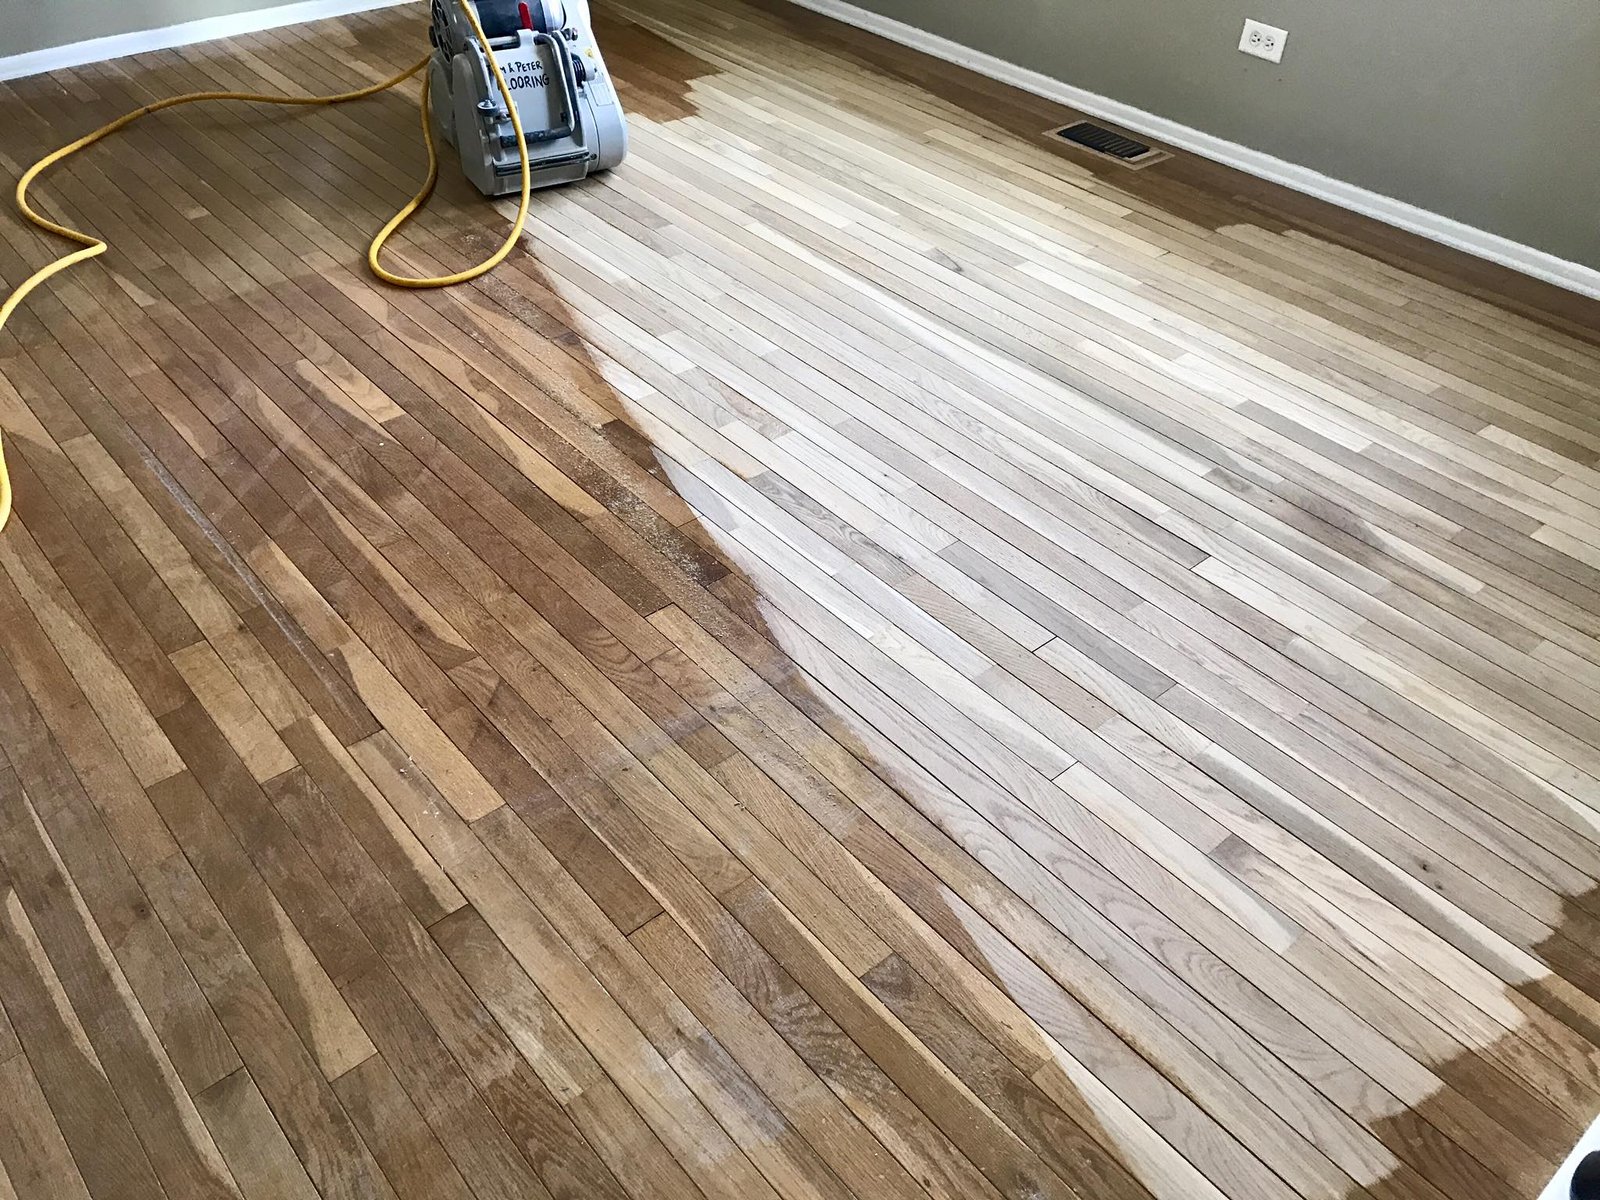 Enhance The Beauty Of Your Home With Professional Timber Floor Polishing